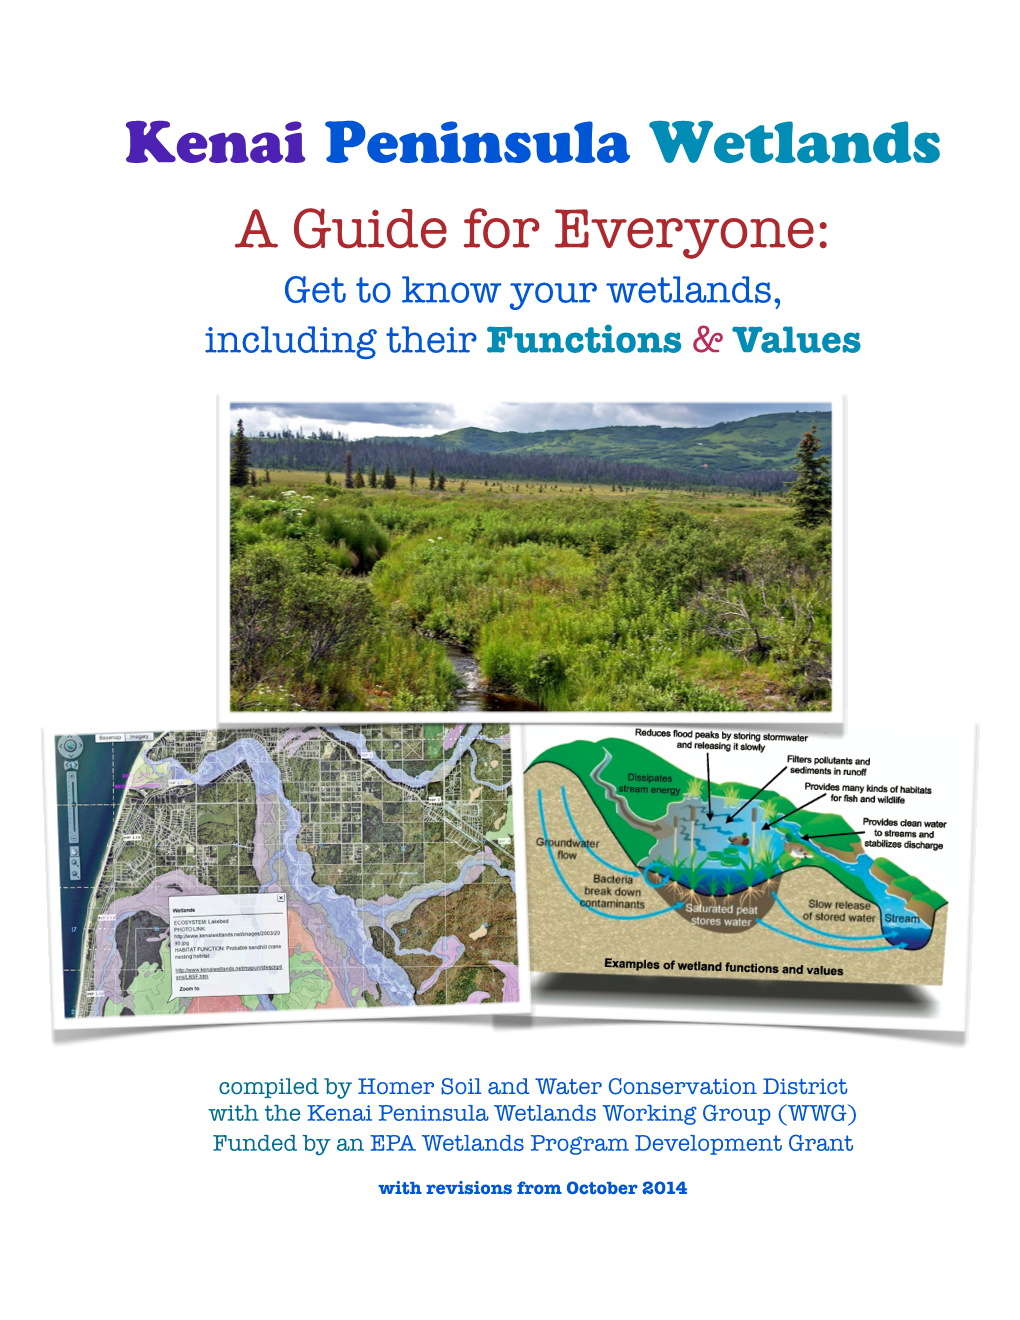 Kenai Peninsula Wetlands a Guide for Everyone: Get to Know Your Wetlands, Including Their Functions & Values